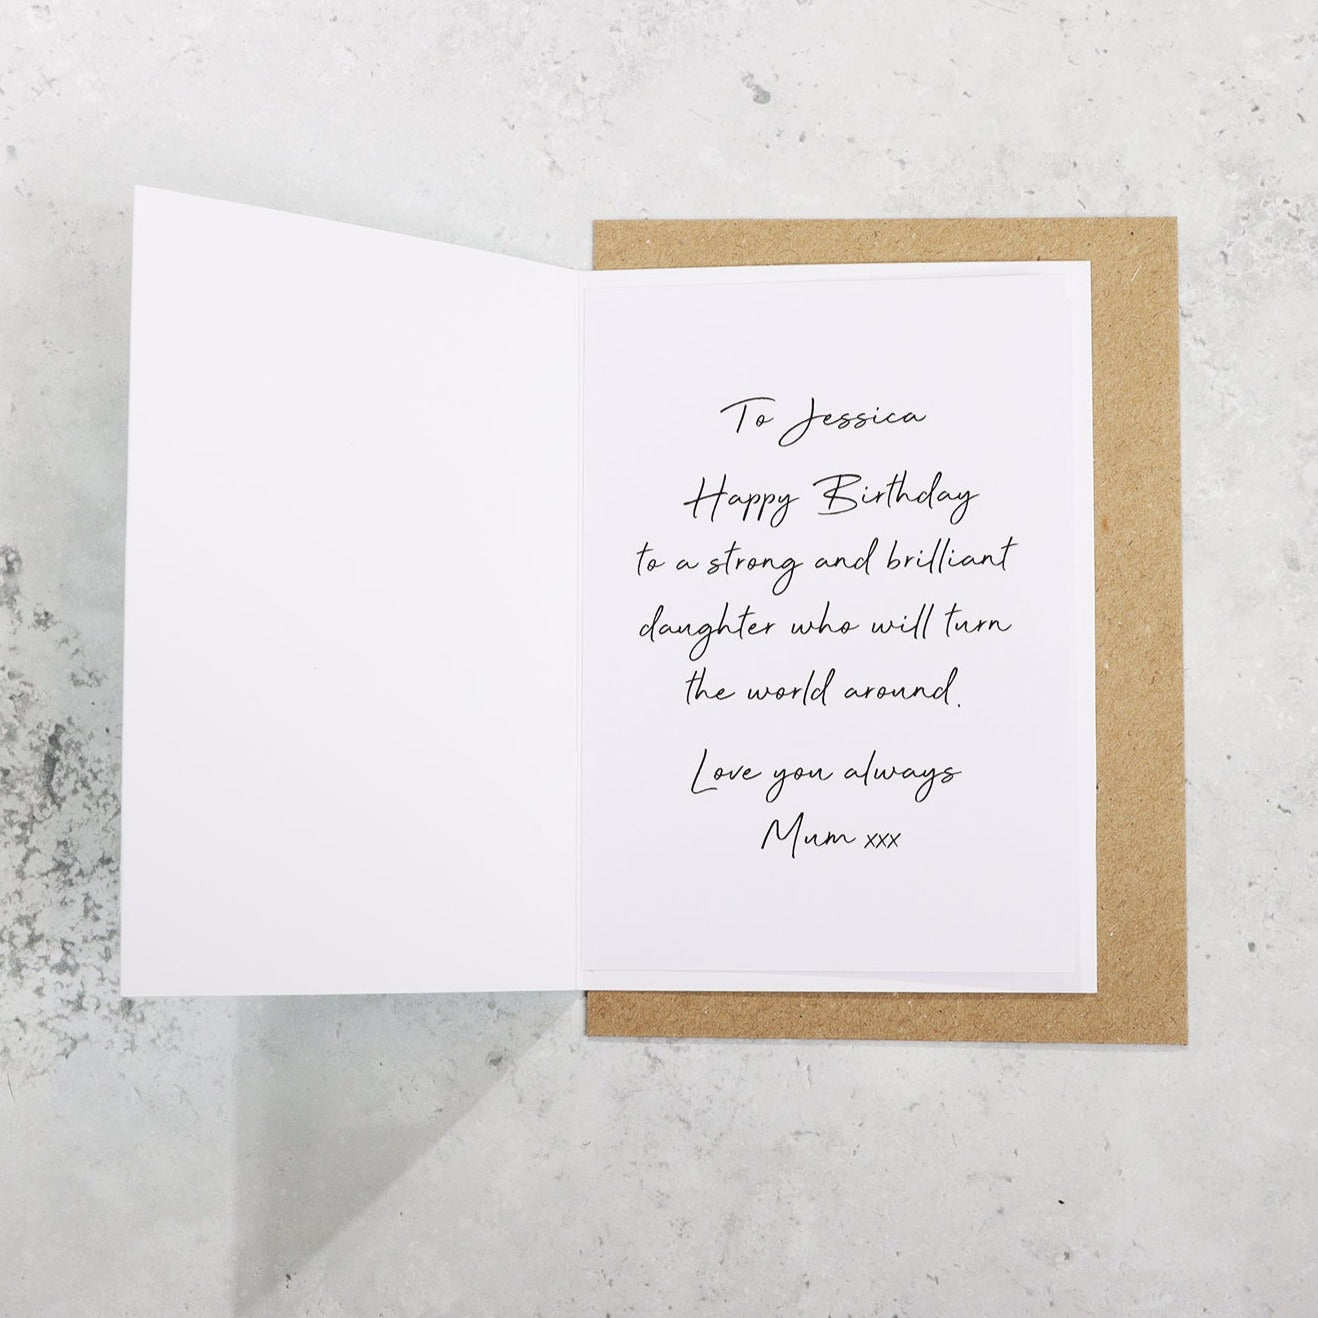 personalised message inside card 